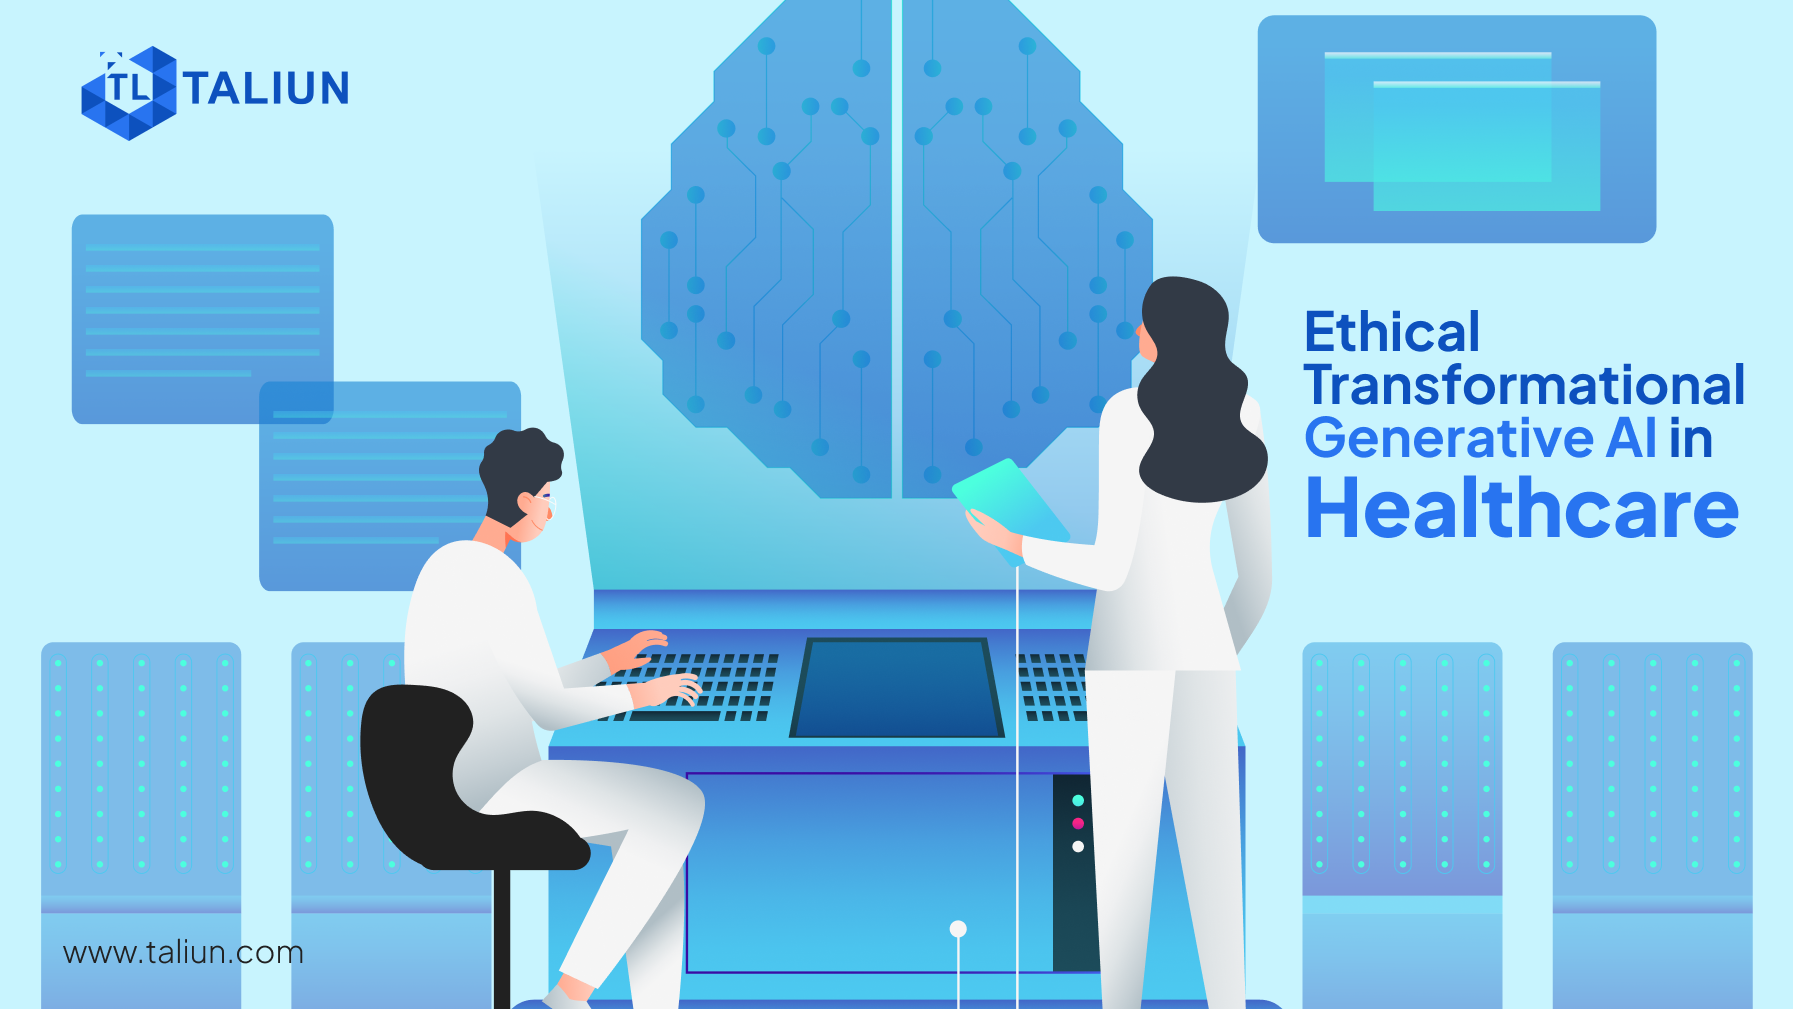 Ethical Transformational Generative AI in Healthcare